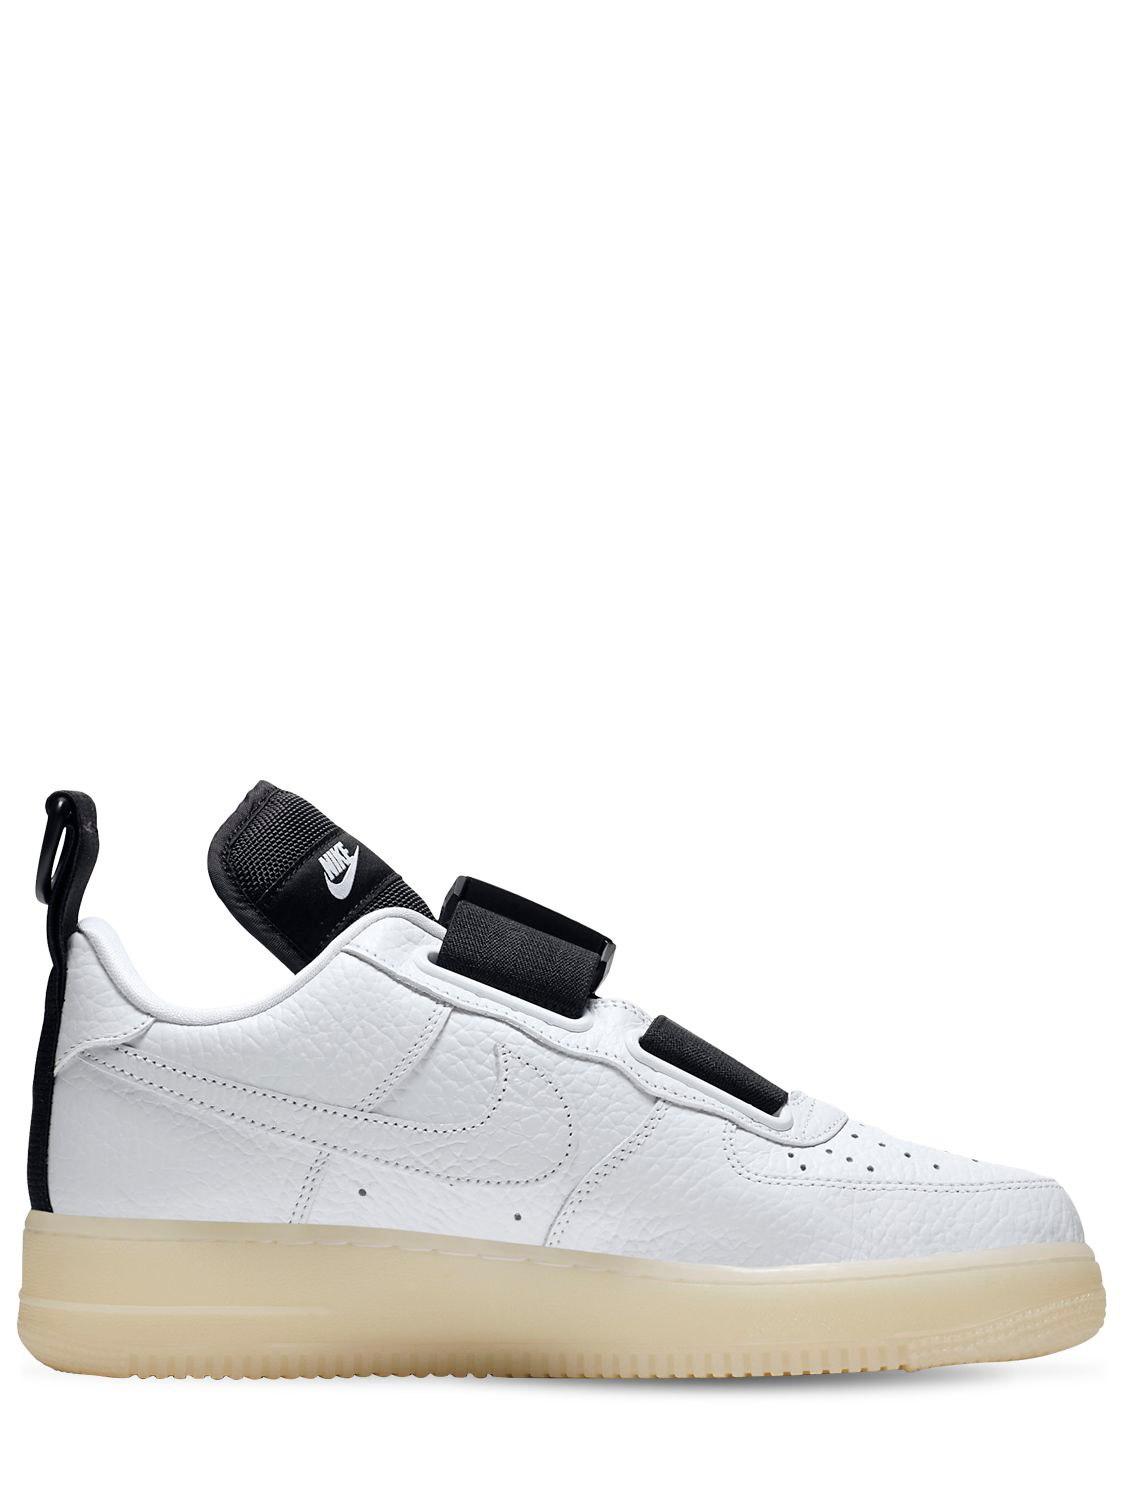 Nike Leather Air Force 1 Utility Qs Sneakers in White/Black (Black) for Men  - Lyst